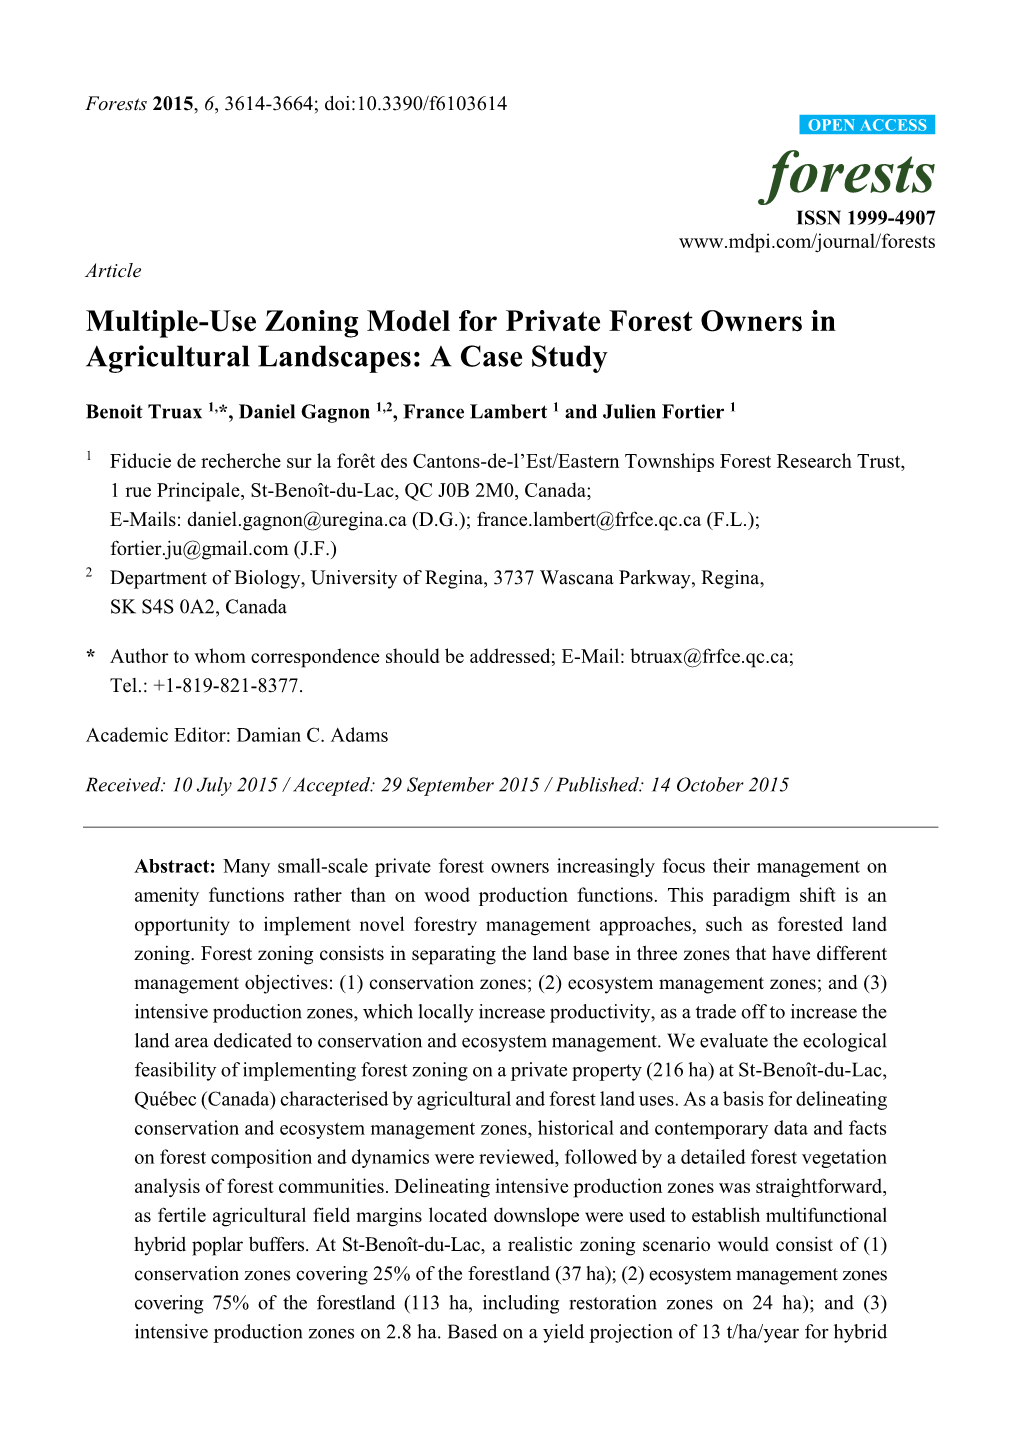 Multiple-Use Zoning Model for Private Forest Owners in Agricultural Landscapes: a Case Study